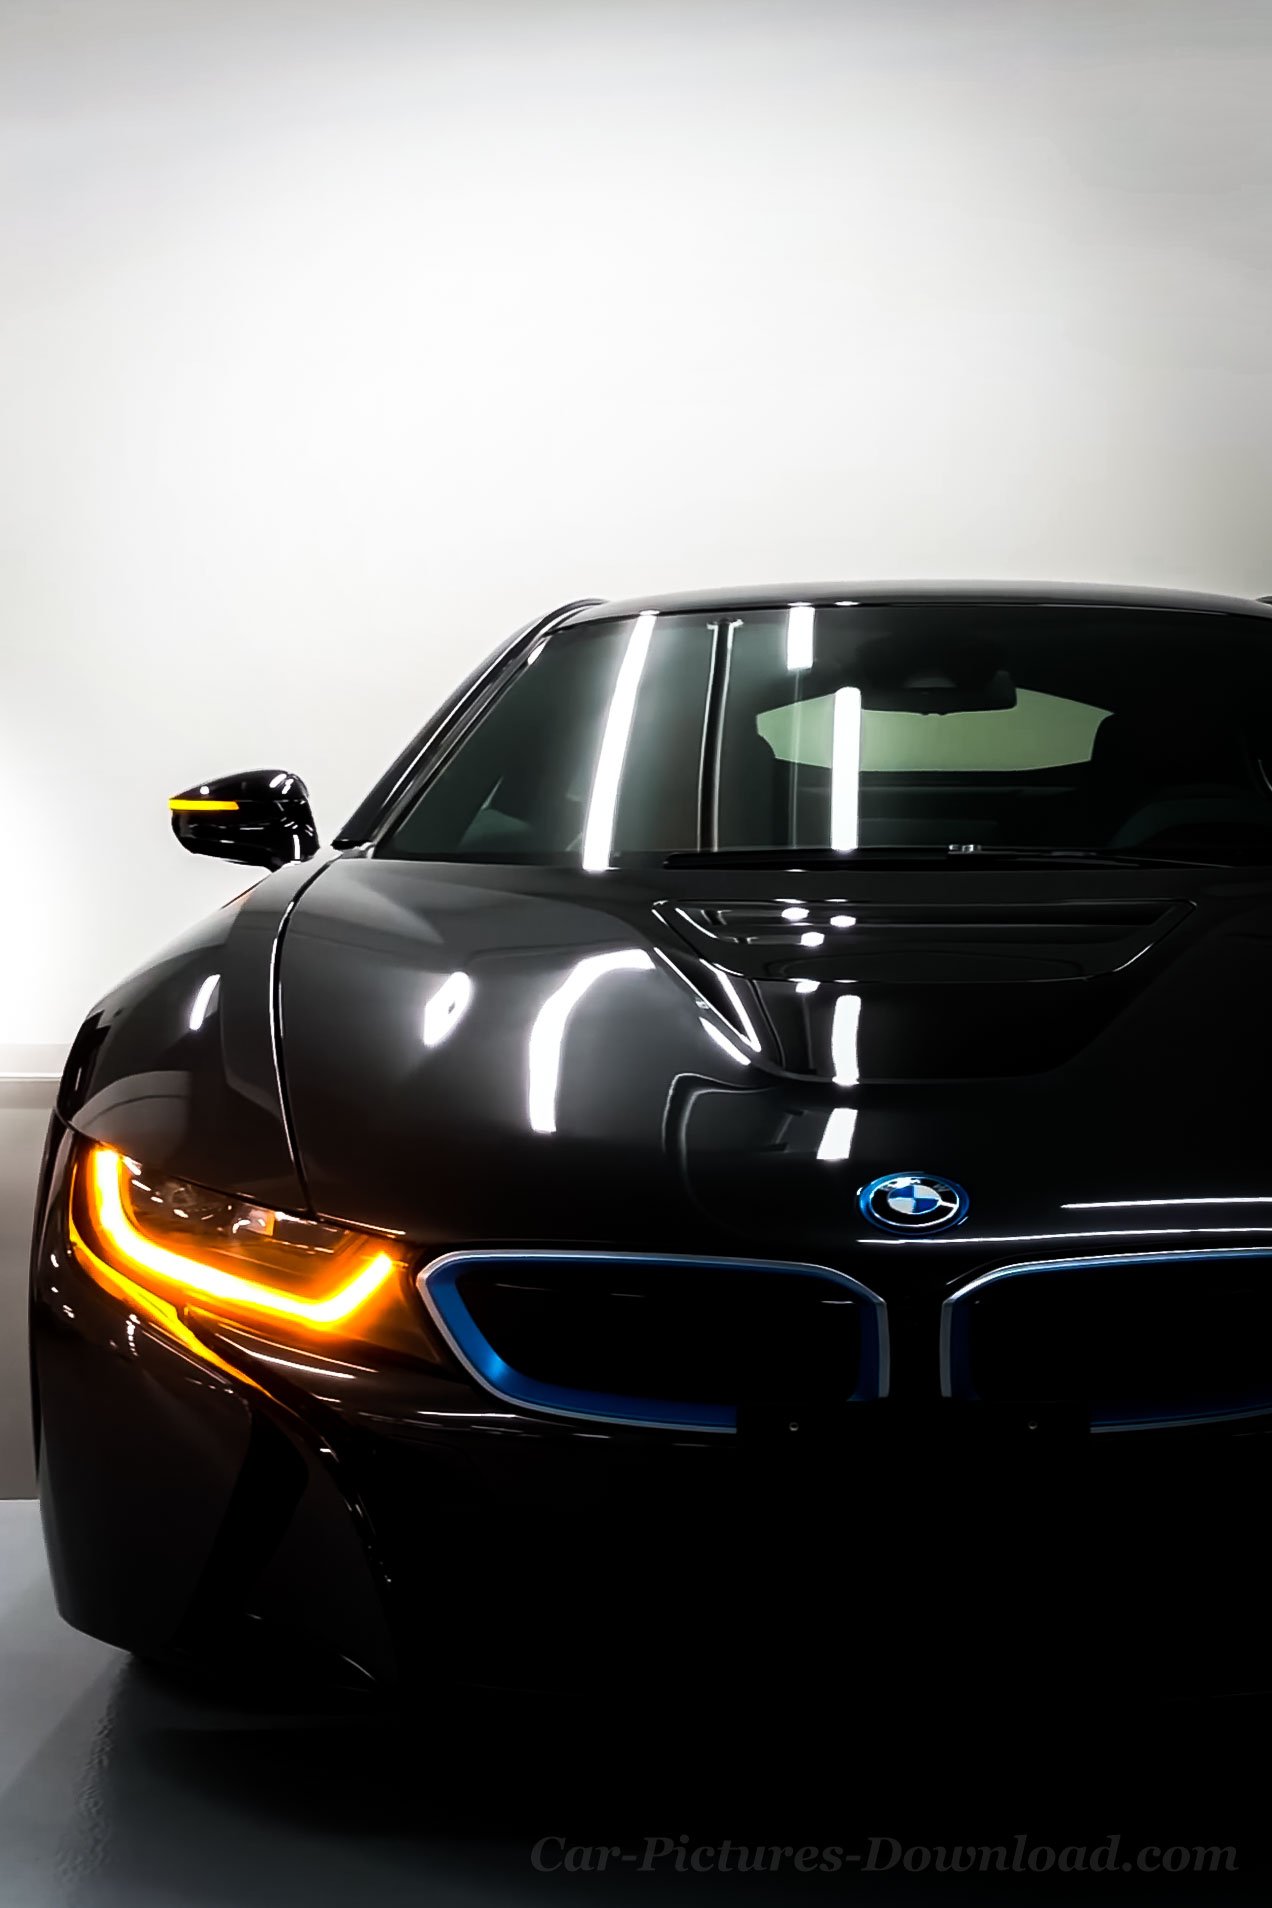 Free Download Bmw Wallpaper Pictures 4K Hd For All Devices Free Images  Download [1272X1908] For Your Desktop, Mobile & Tablet | Explore 55+ Hd  Android Bmw Wallpapers | Hd Bmw Wallpapers, Bmw